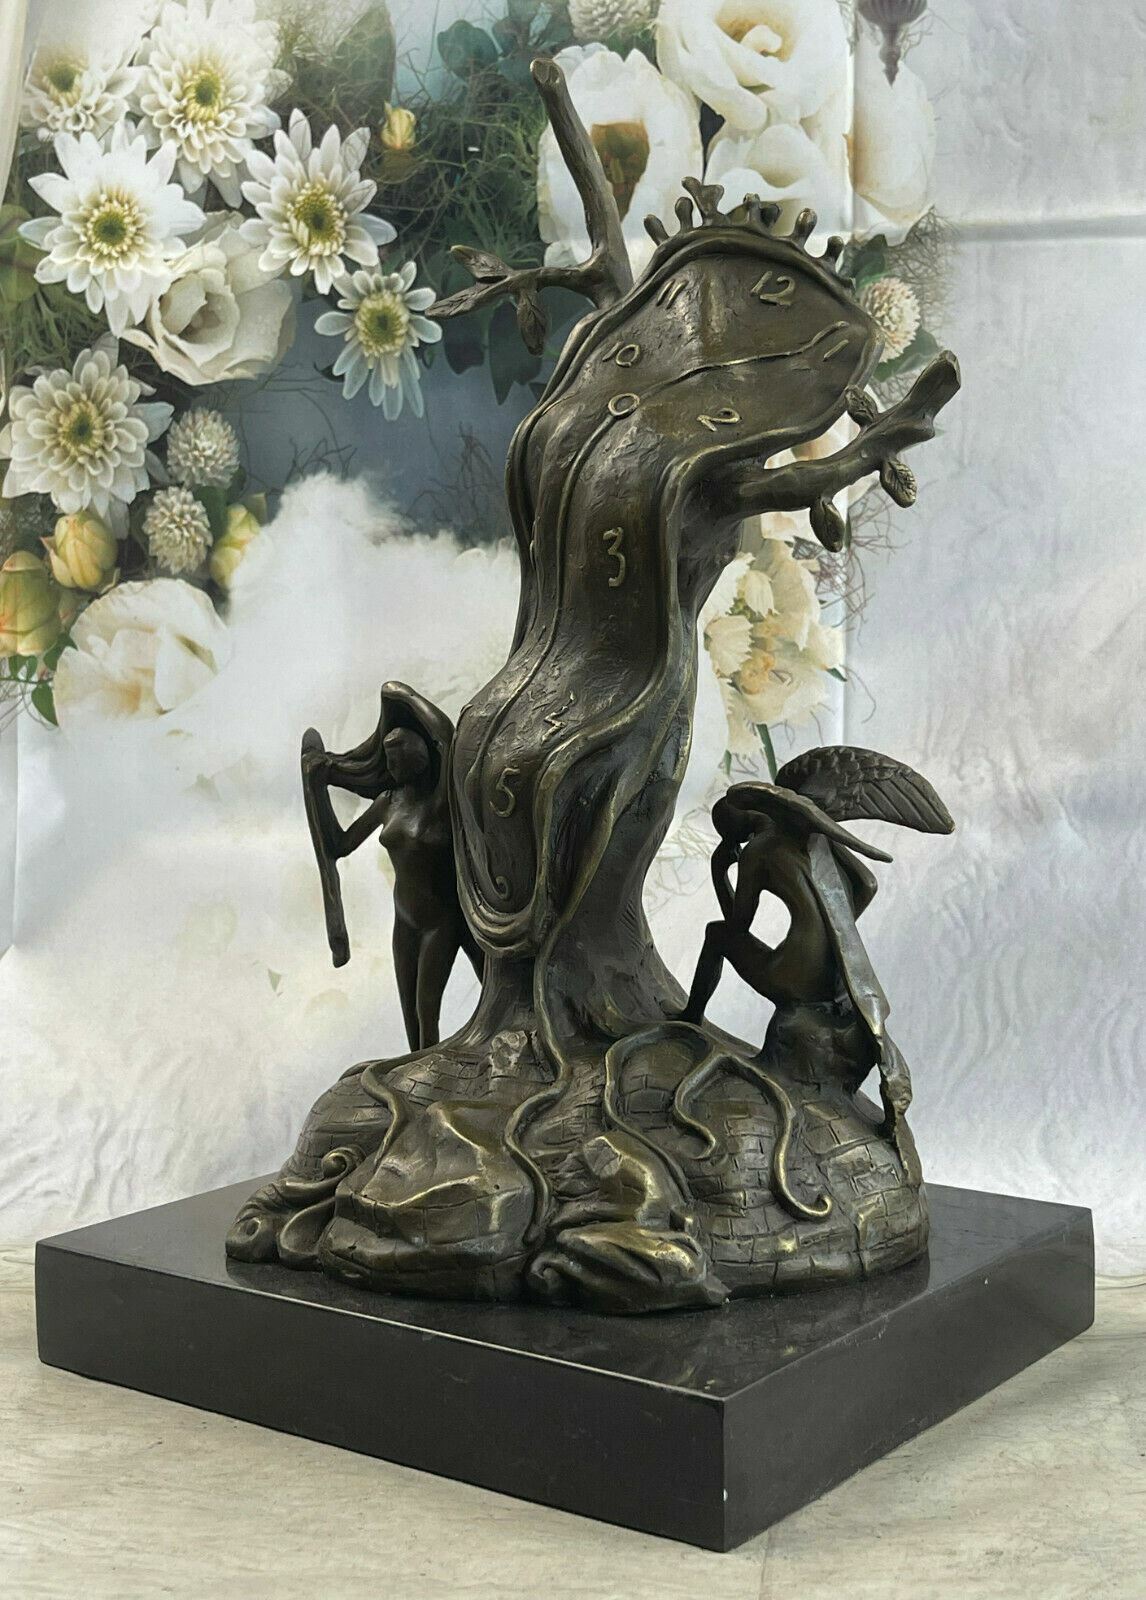 Persistence of Memory of Time by Dali Hot Bronze Museum Quality Sculpture Sale